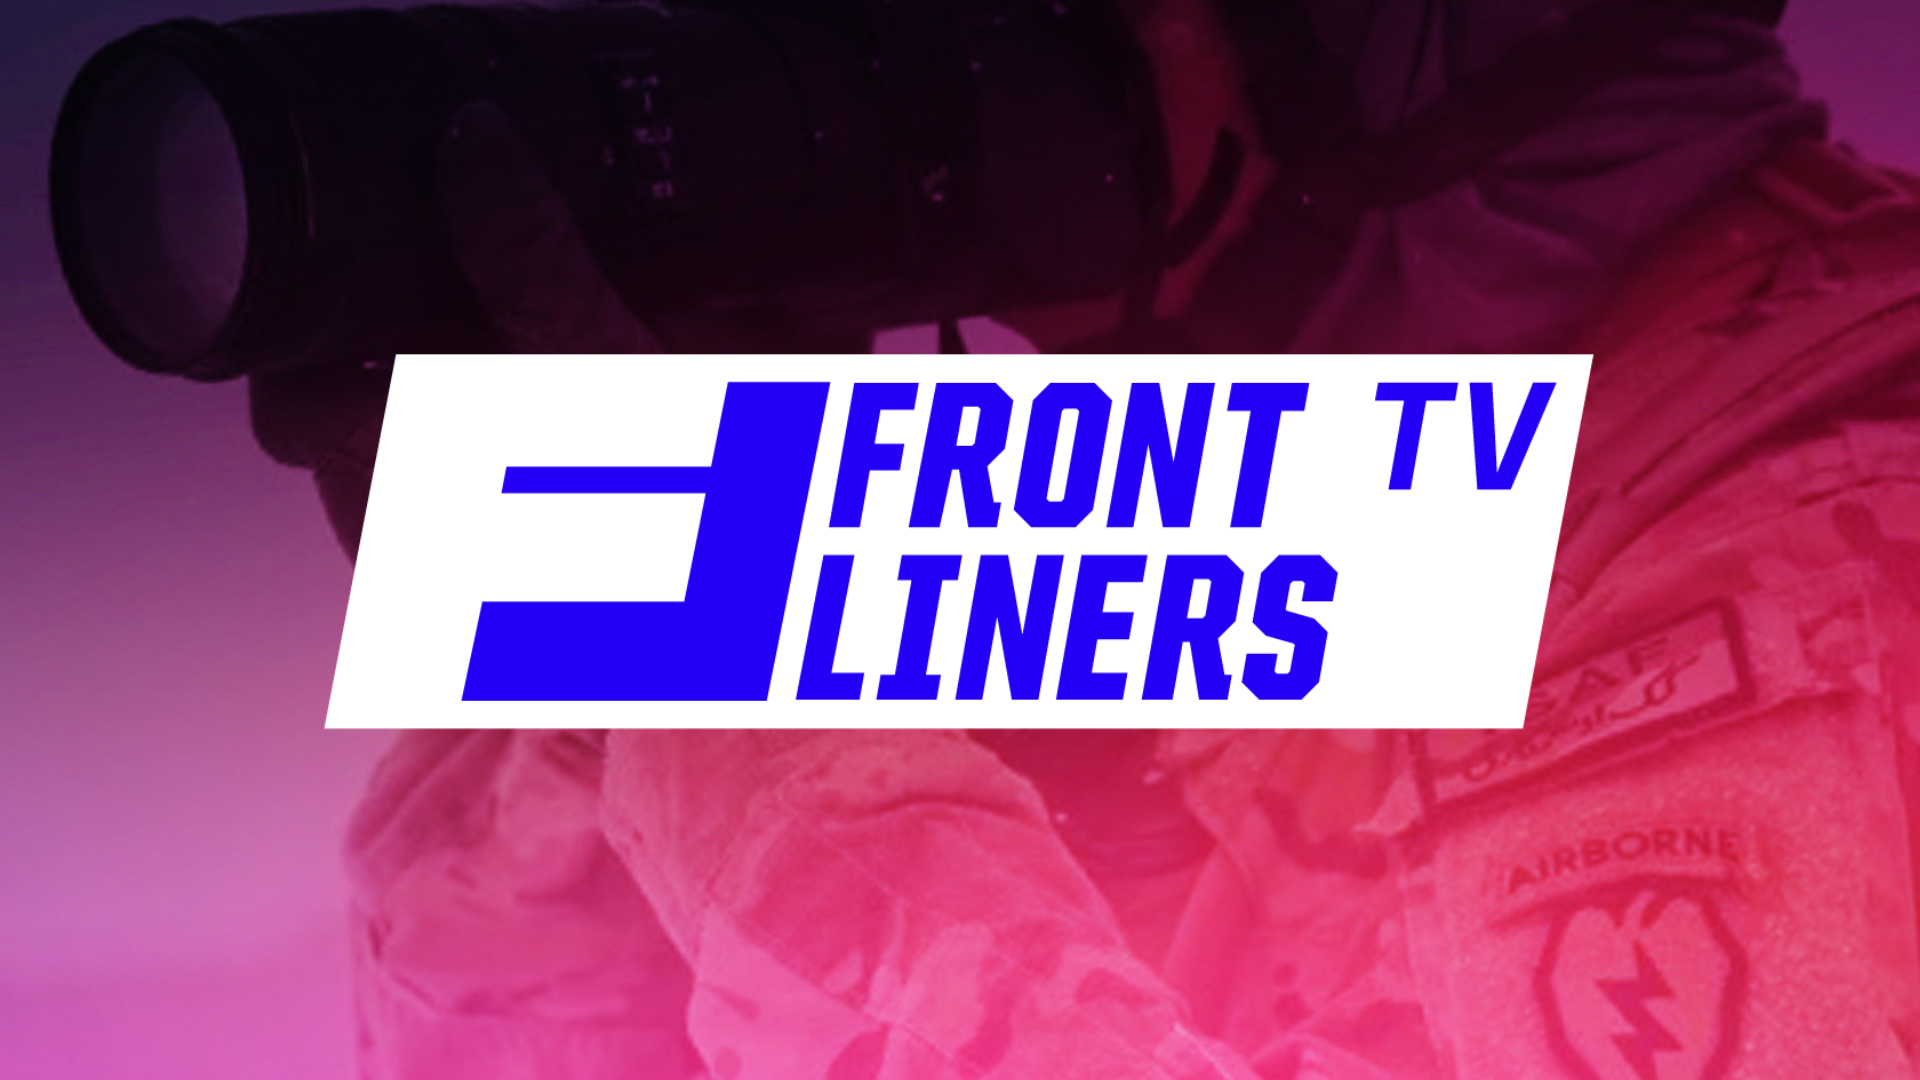 Frontliners TV – FAST Channel & a Platform of Recognition